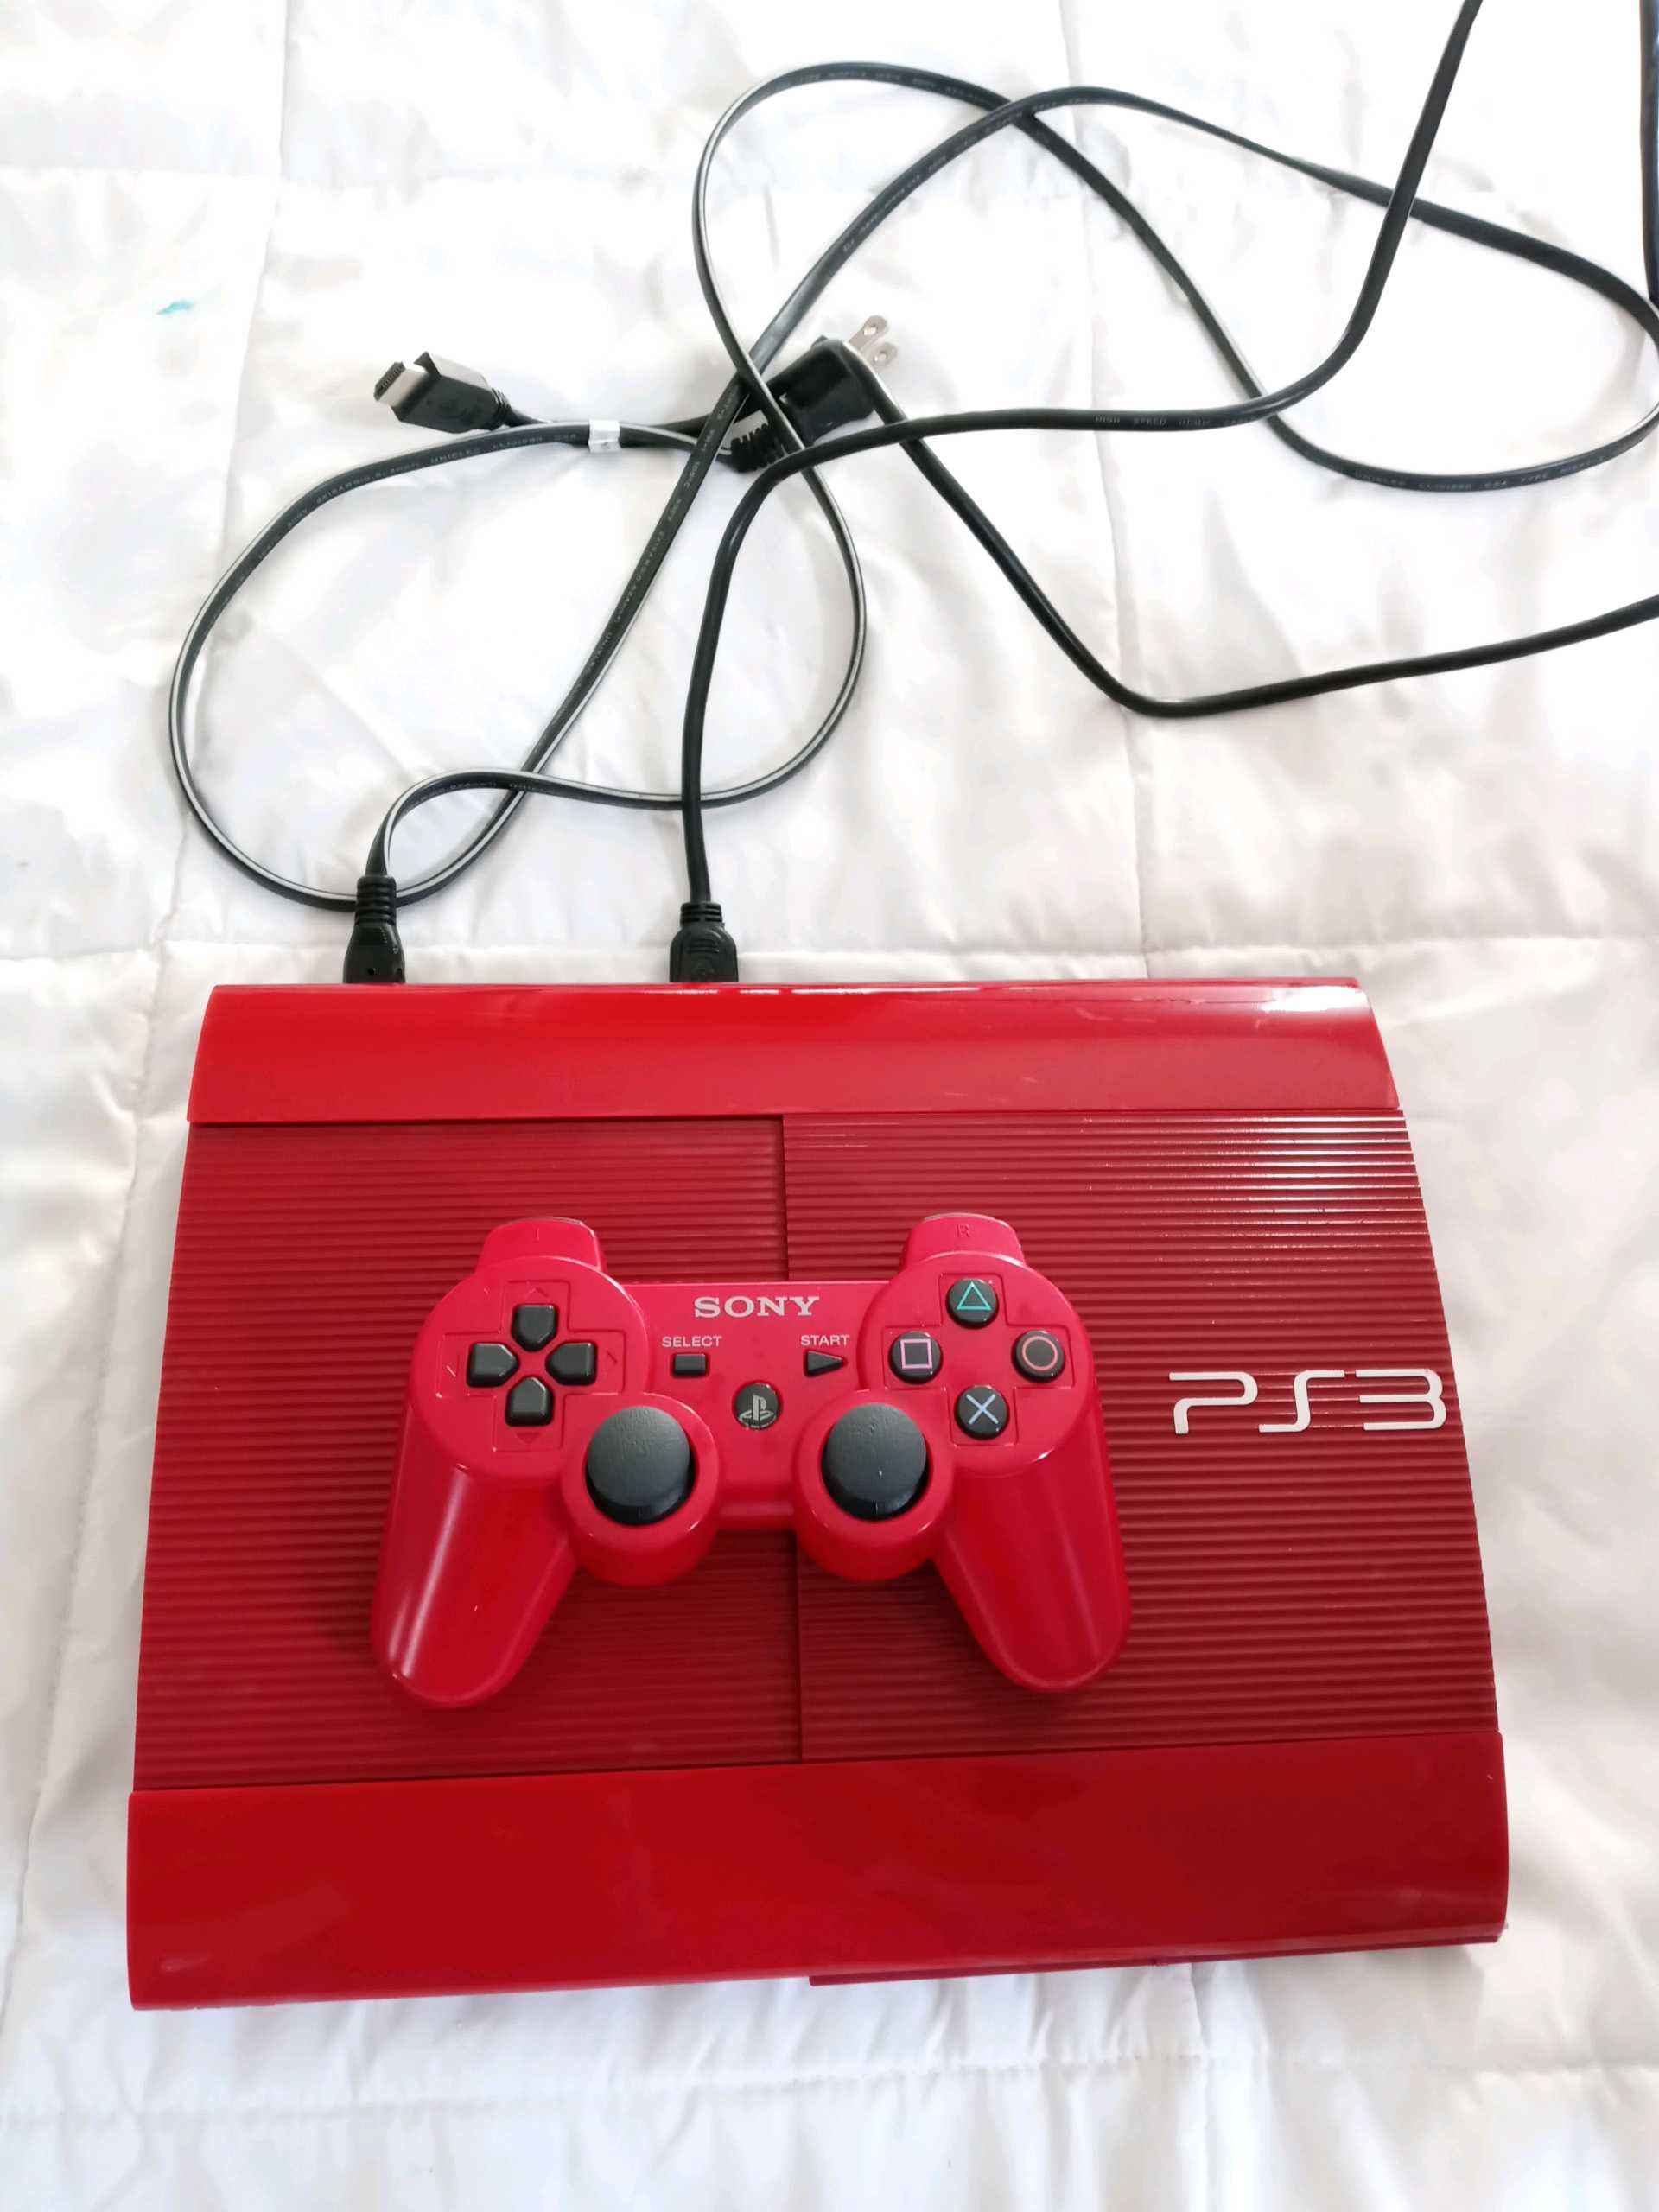 Ps3 red and all games